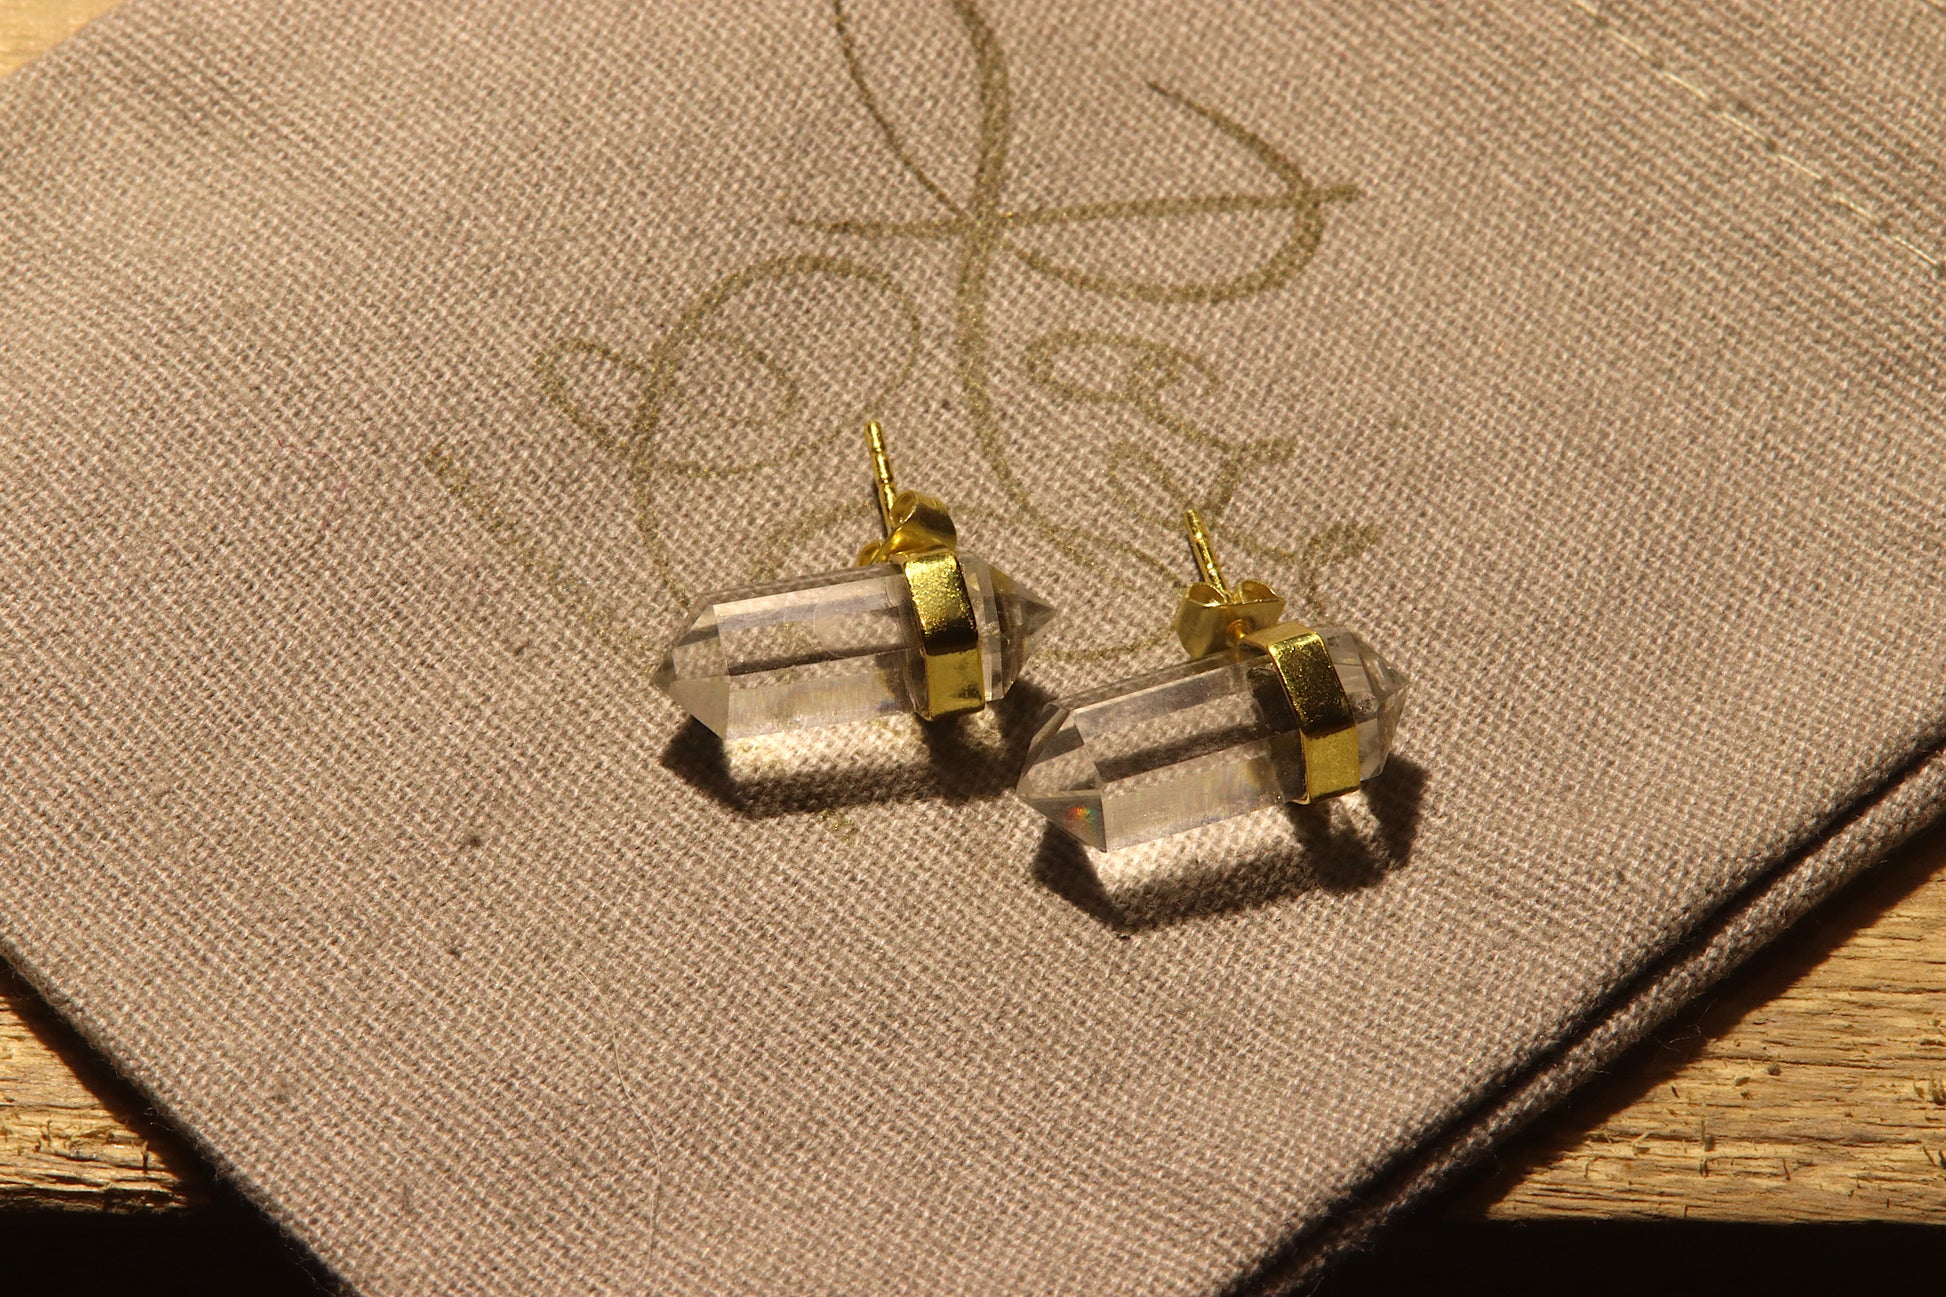 Clear crystal earrings in gold casing on a grey cotton drawstring bag with a gold rose and co logo stamped on it.